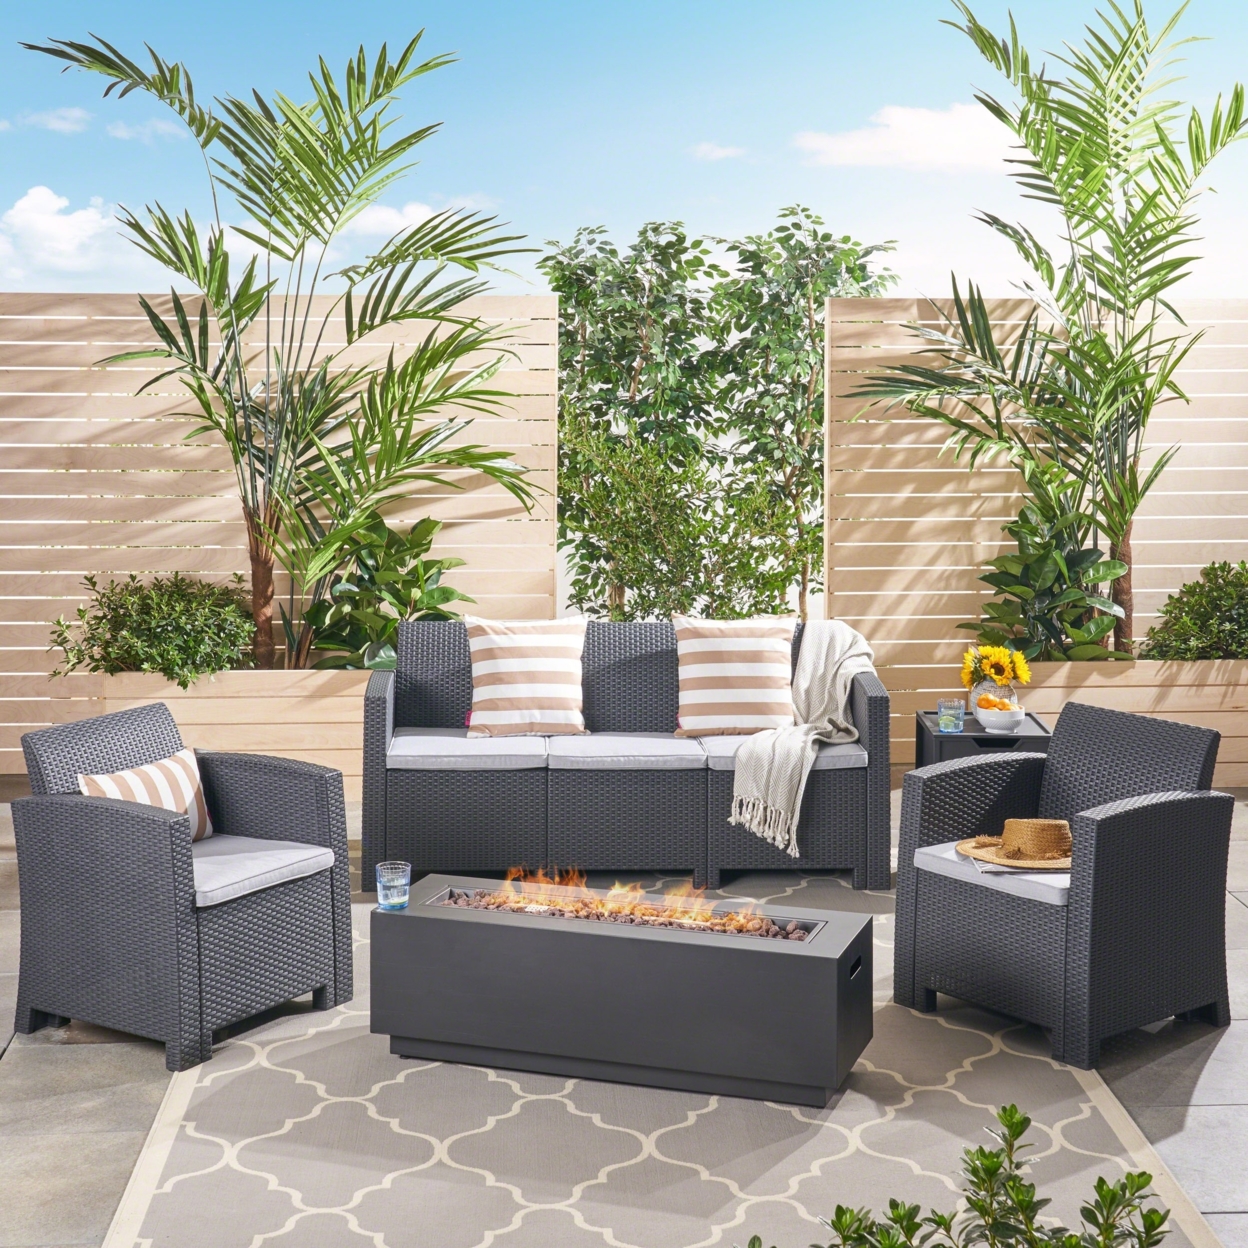 Dane Outdoor 5-Seater Wicker Print Chat Set With Fire Pit And Tank Holder, Charcoal With Light Gray And Dark Gray